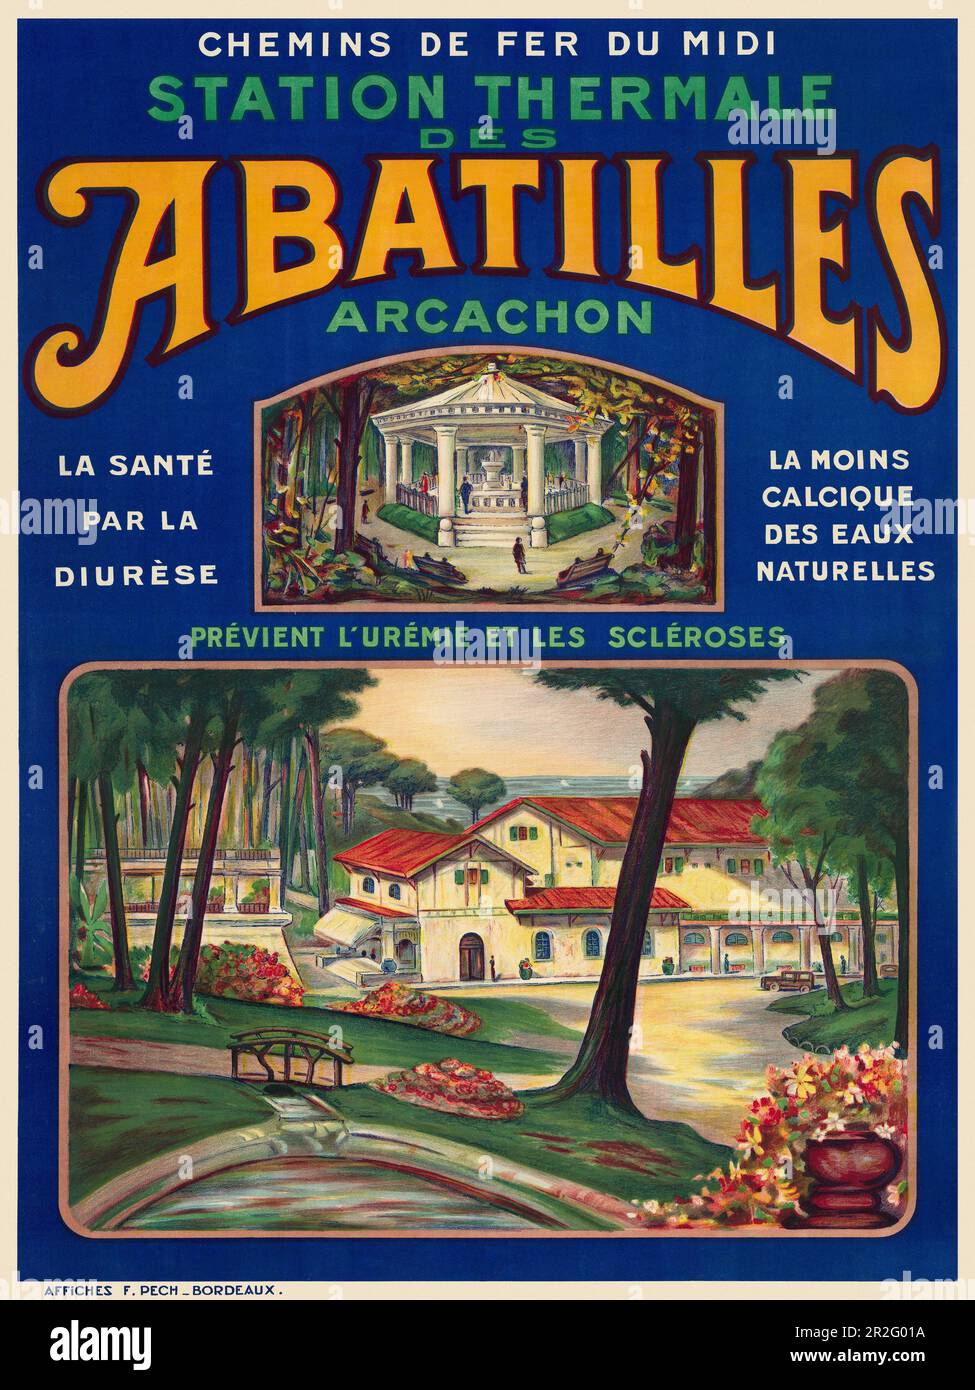 Chemins de Fer du Midi. Station thermale des Abatilles, Arcachon. Artist unknown. Poster published in 1920 in France. Stock Photo